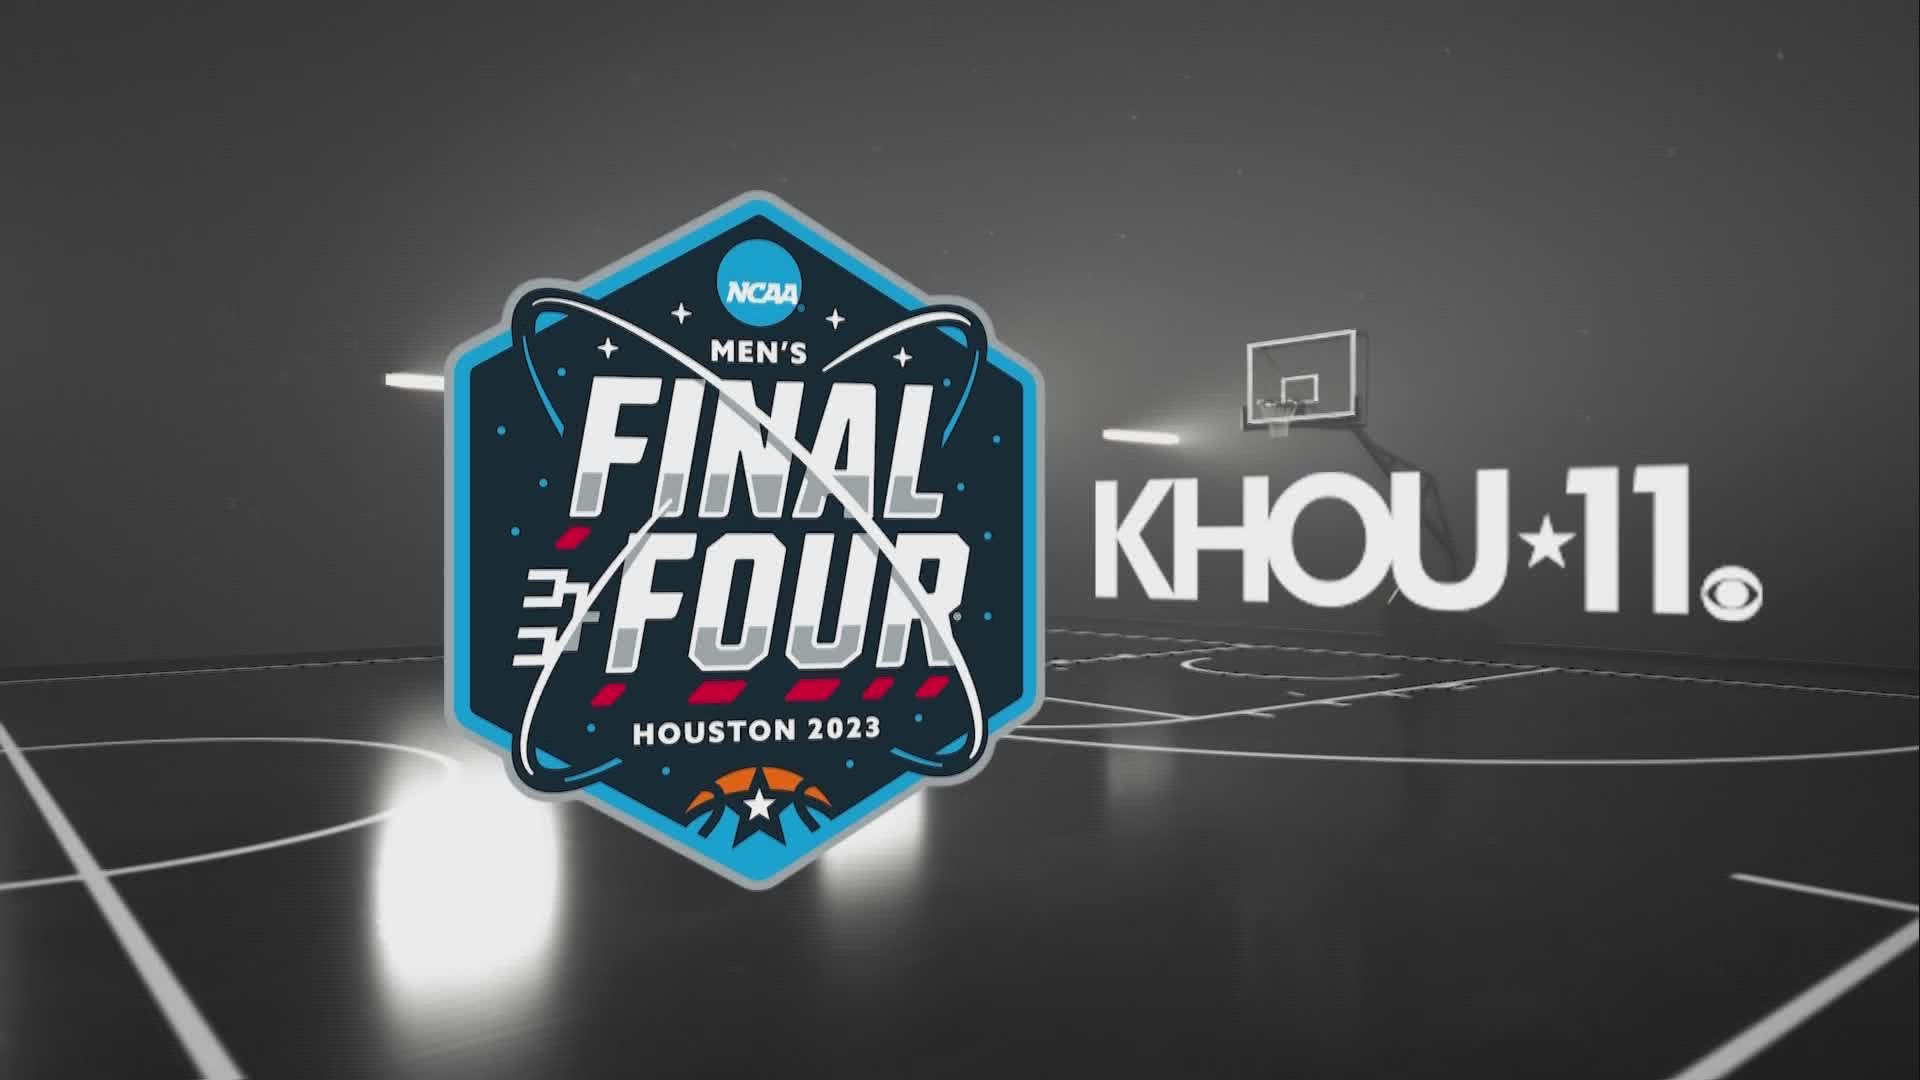 Houston hosts the 2023 NCAA Men's Final Four and the KHOU 11 crew is here for it all!